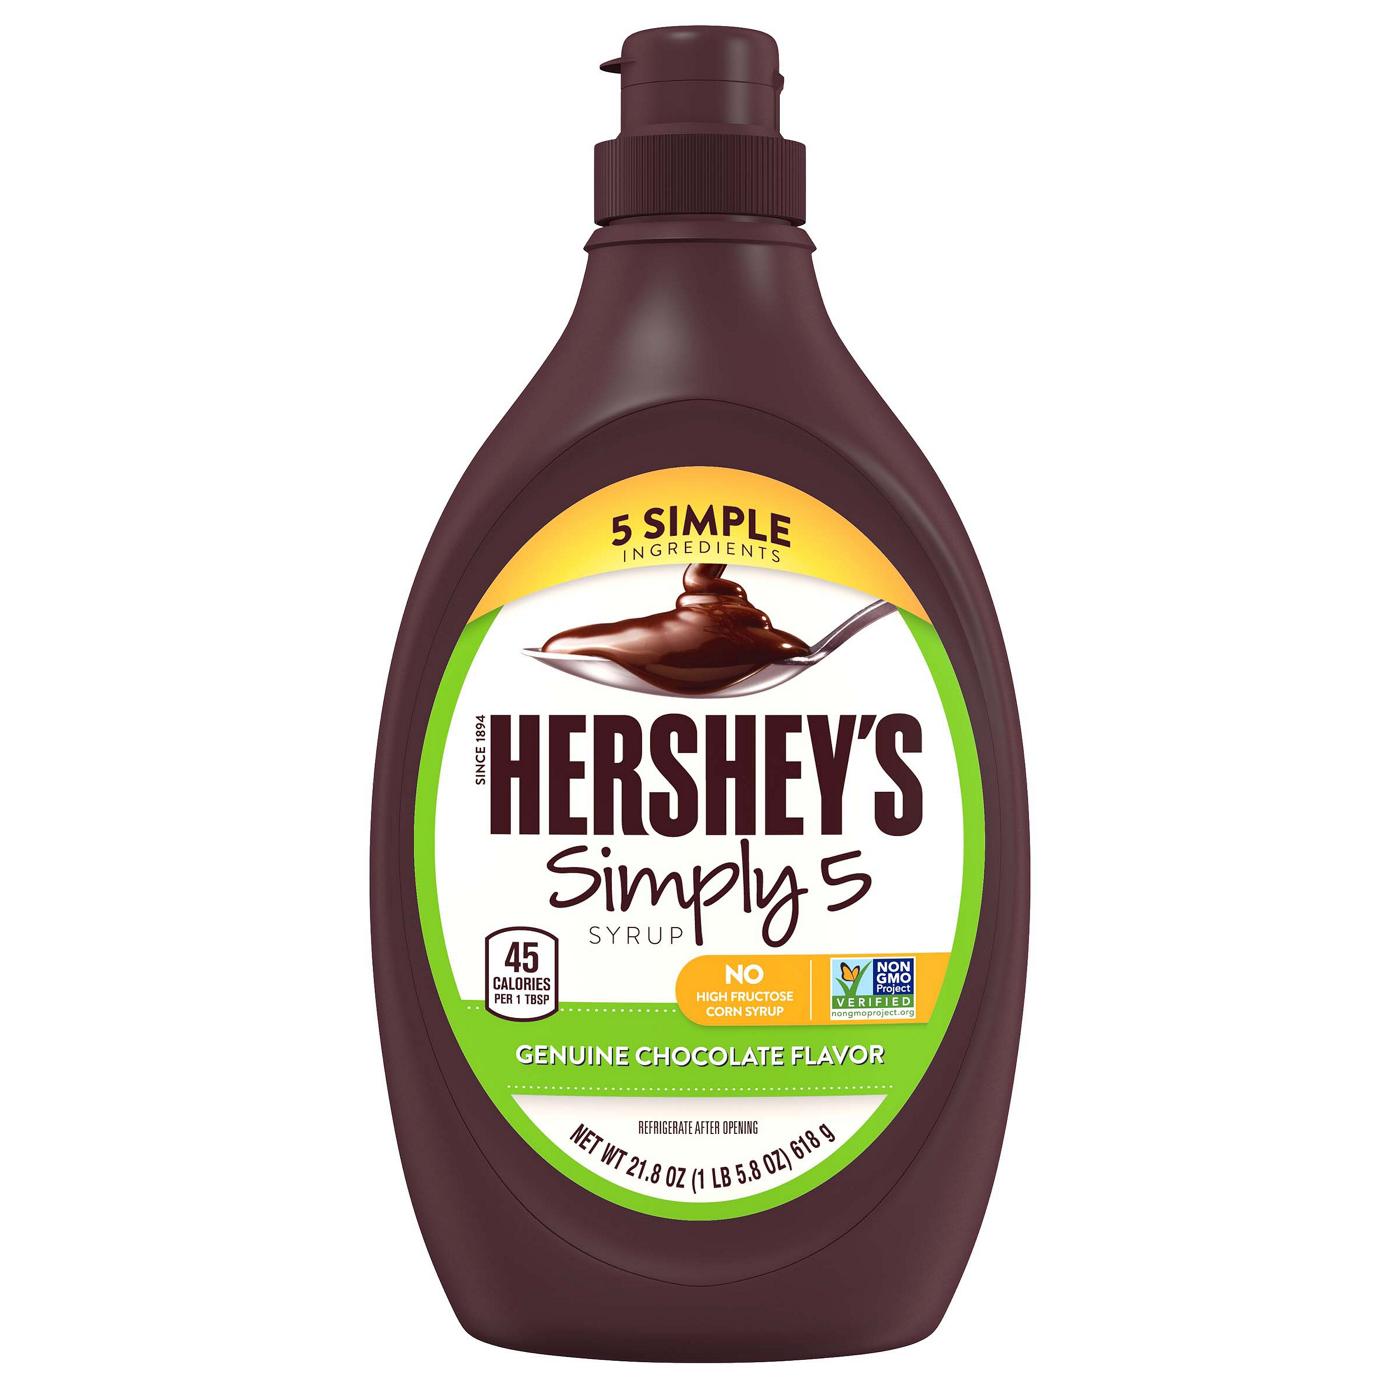 Hershey's Simply 5 Chocolate Syrup Bottle; image 1 of 6